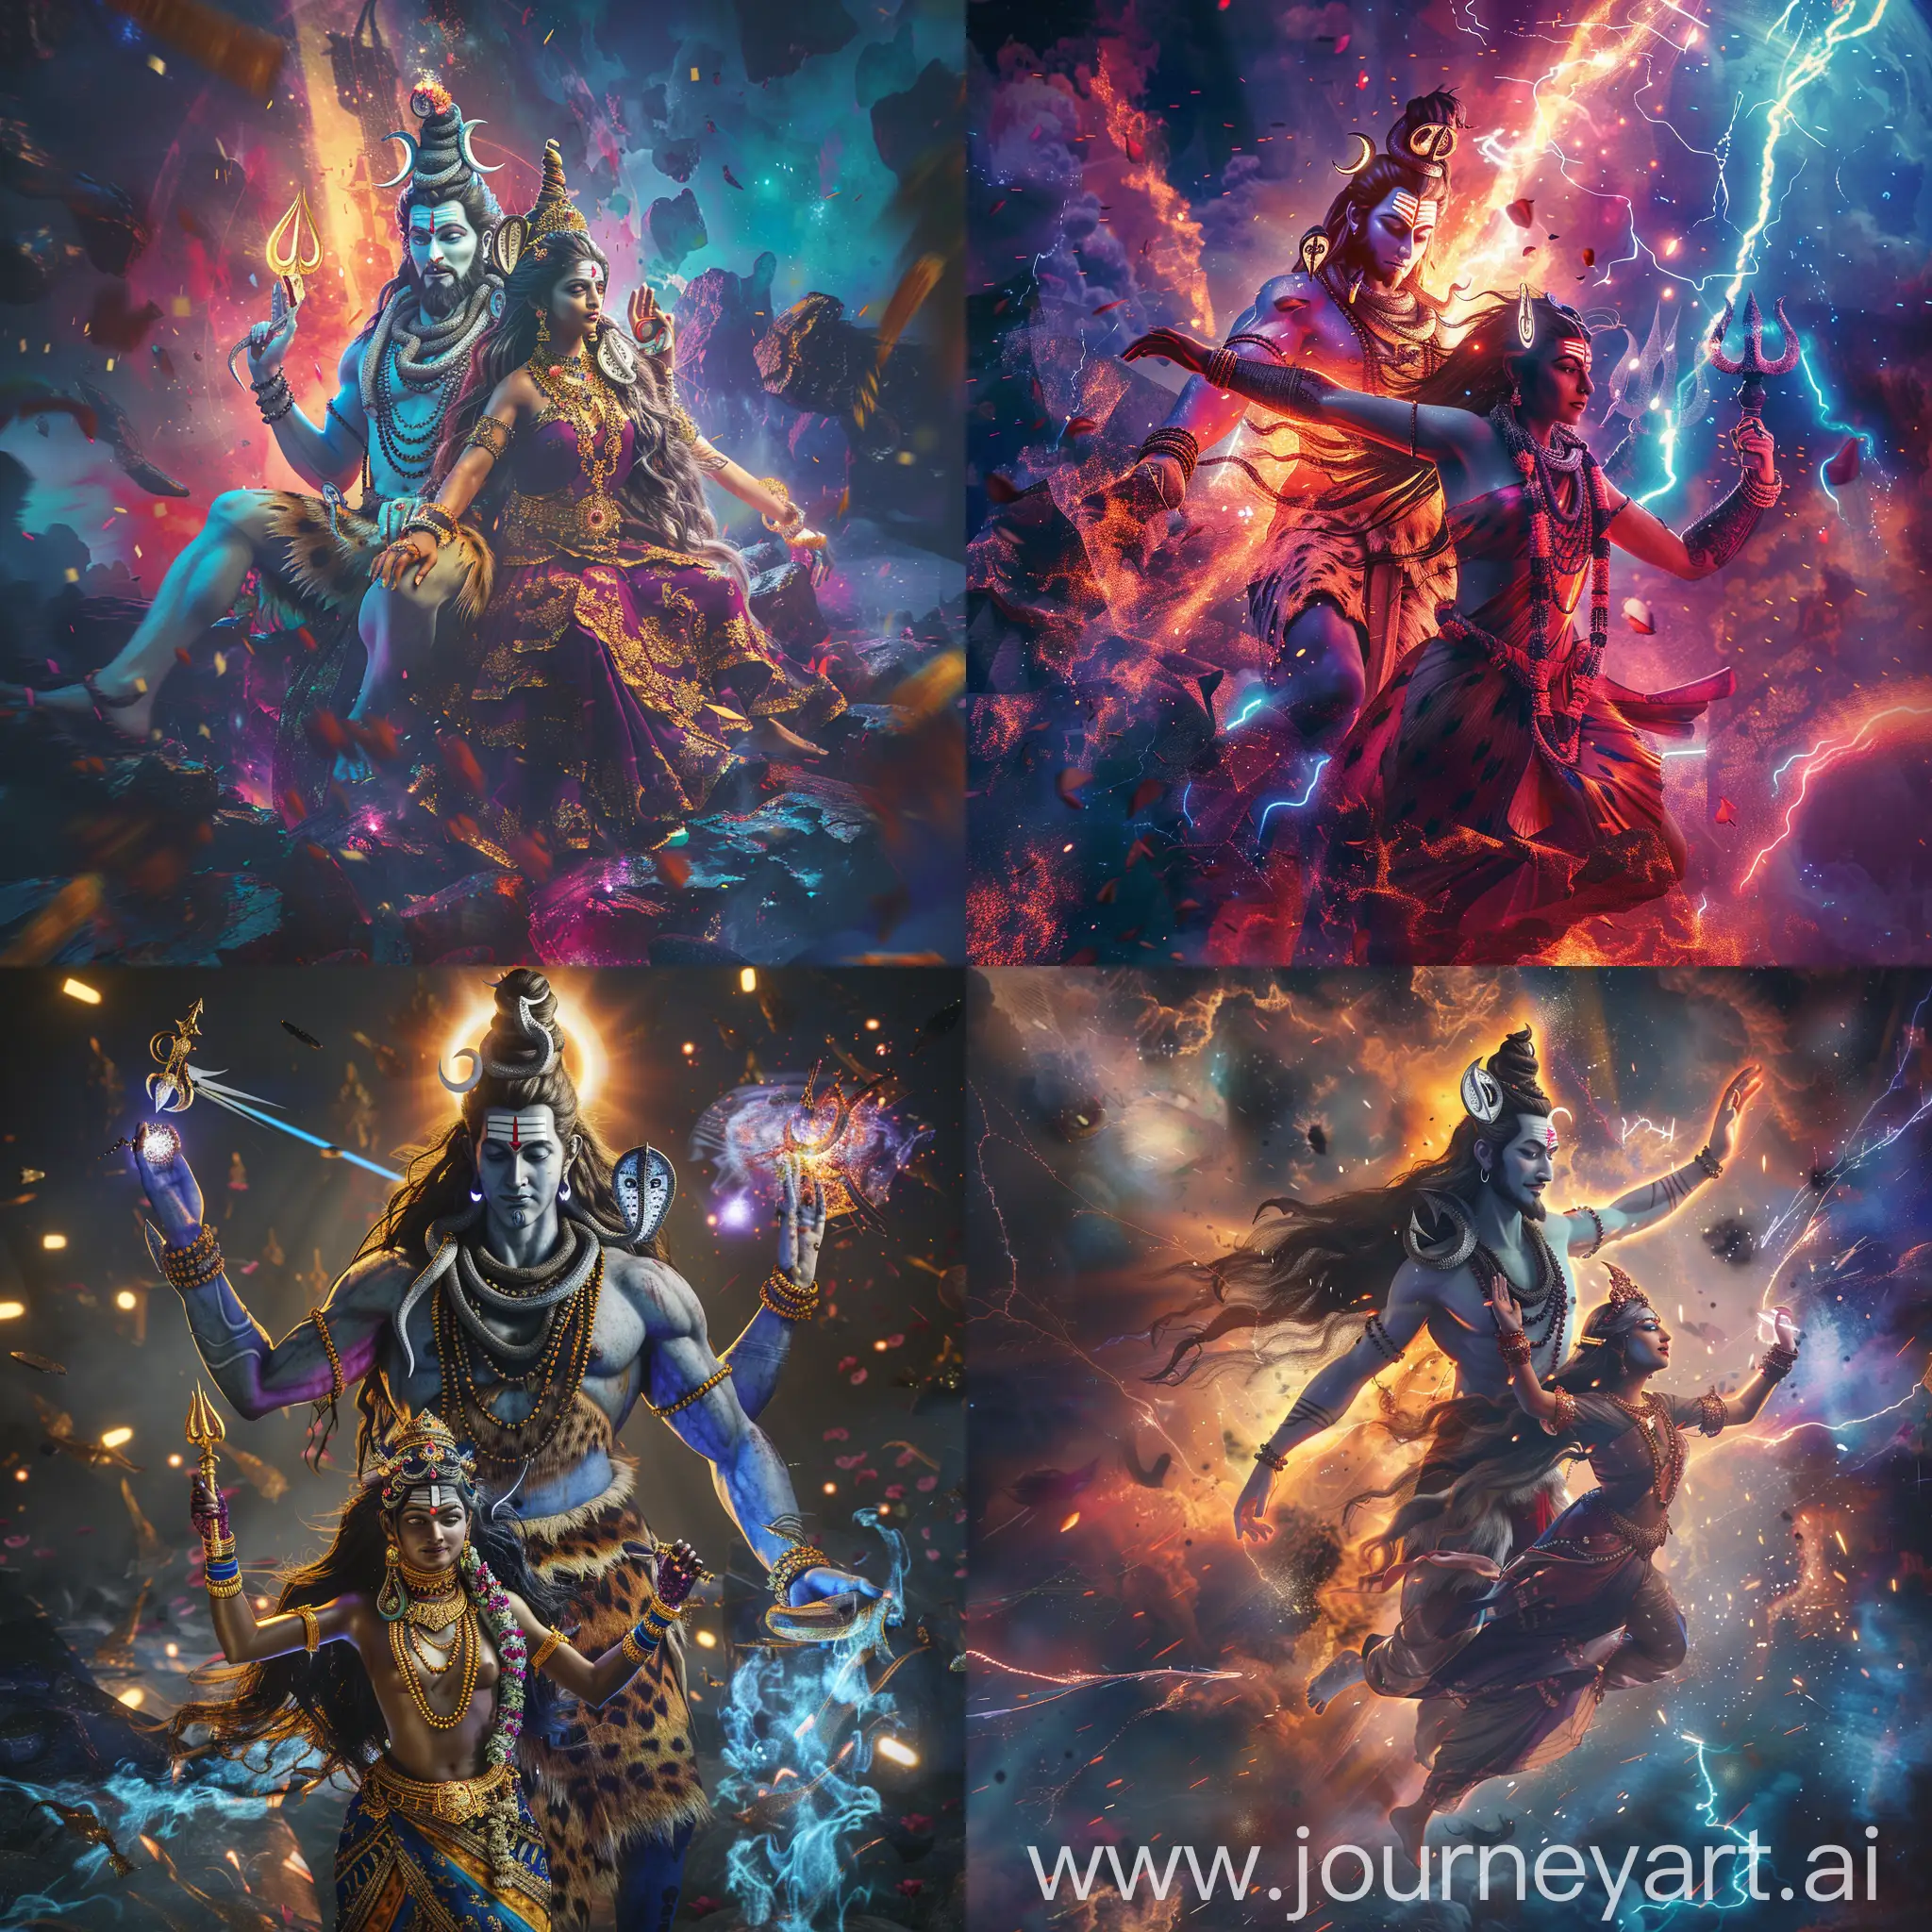 Divine-Journey-Lord-Shiva-and-Goddess-Parvati-Surrounded-by-Vibrant-Cosmic-Energies